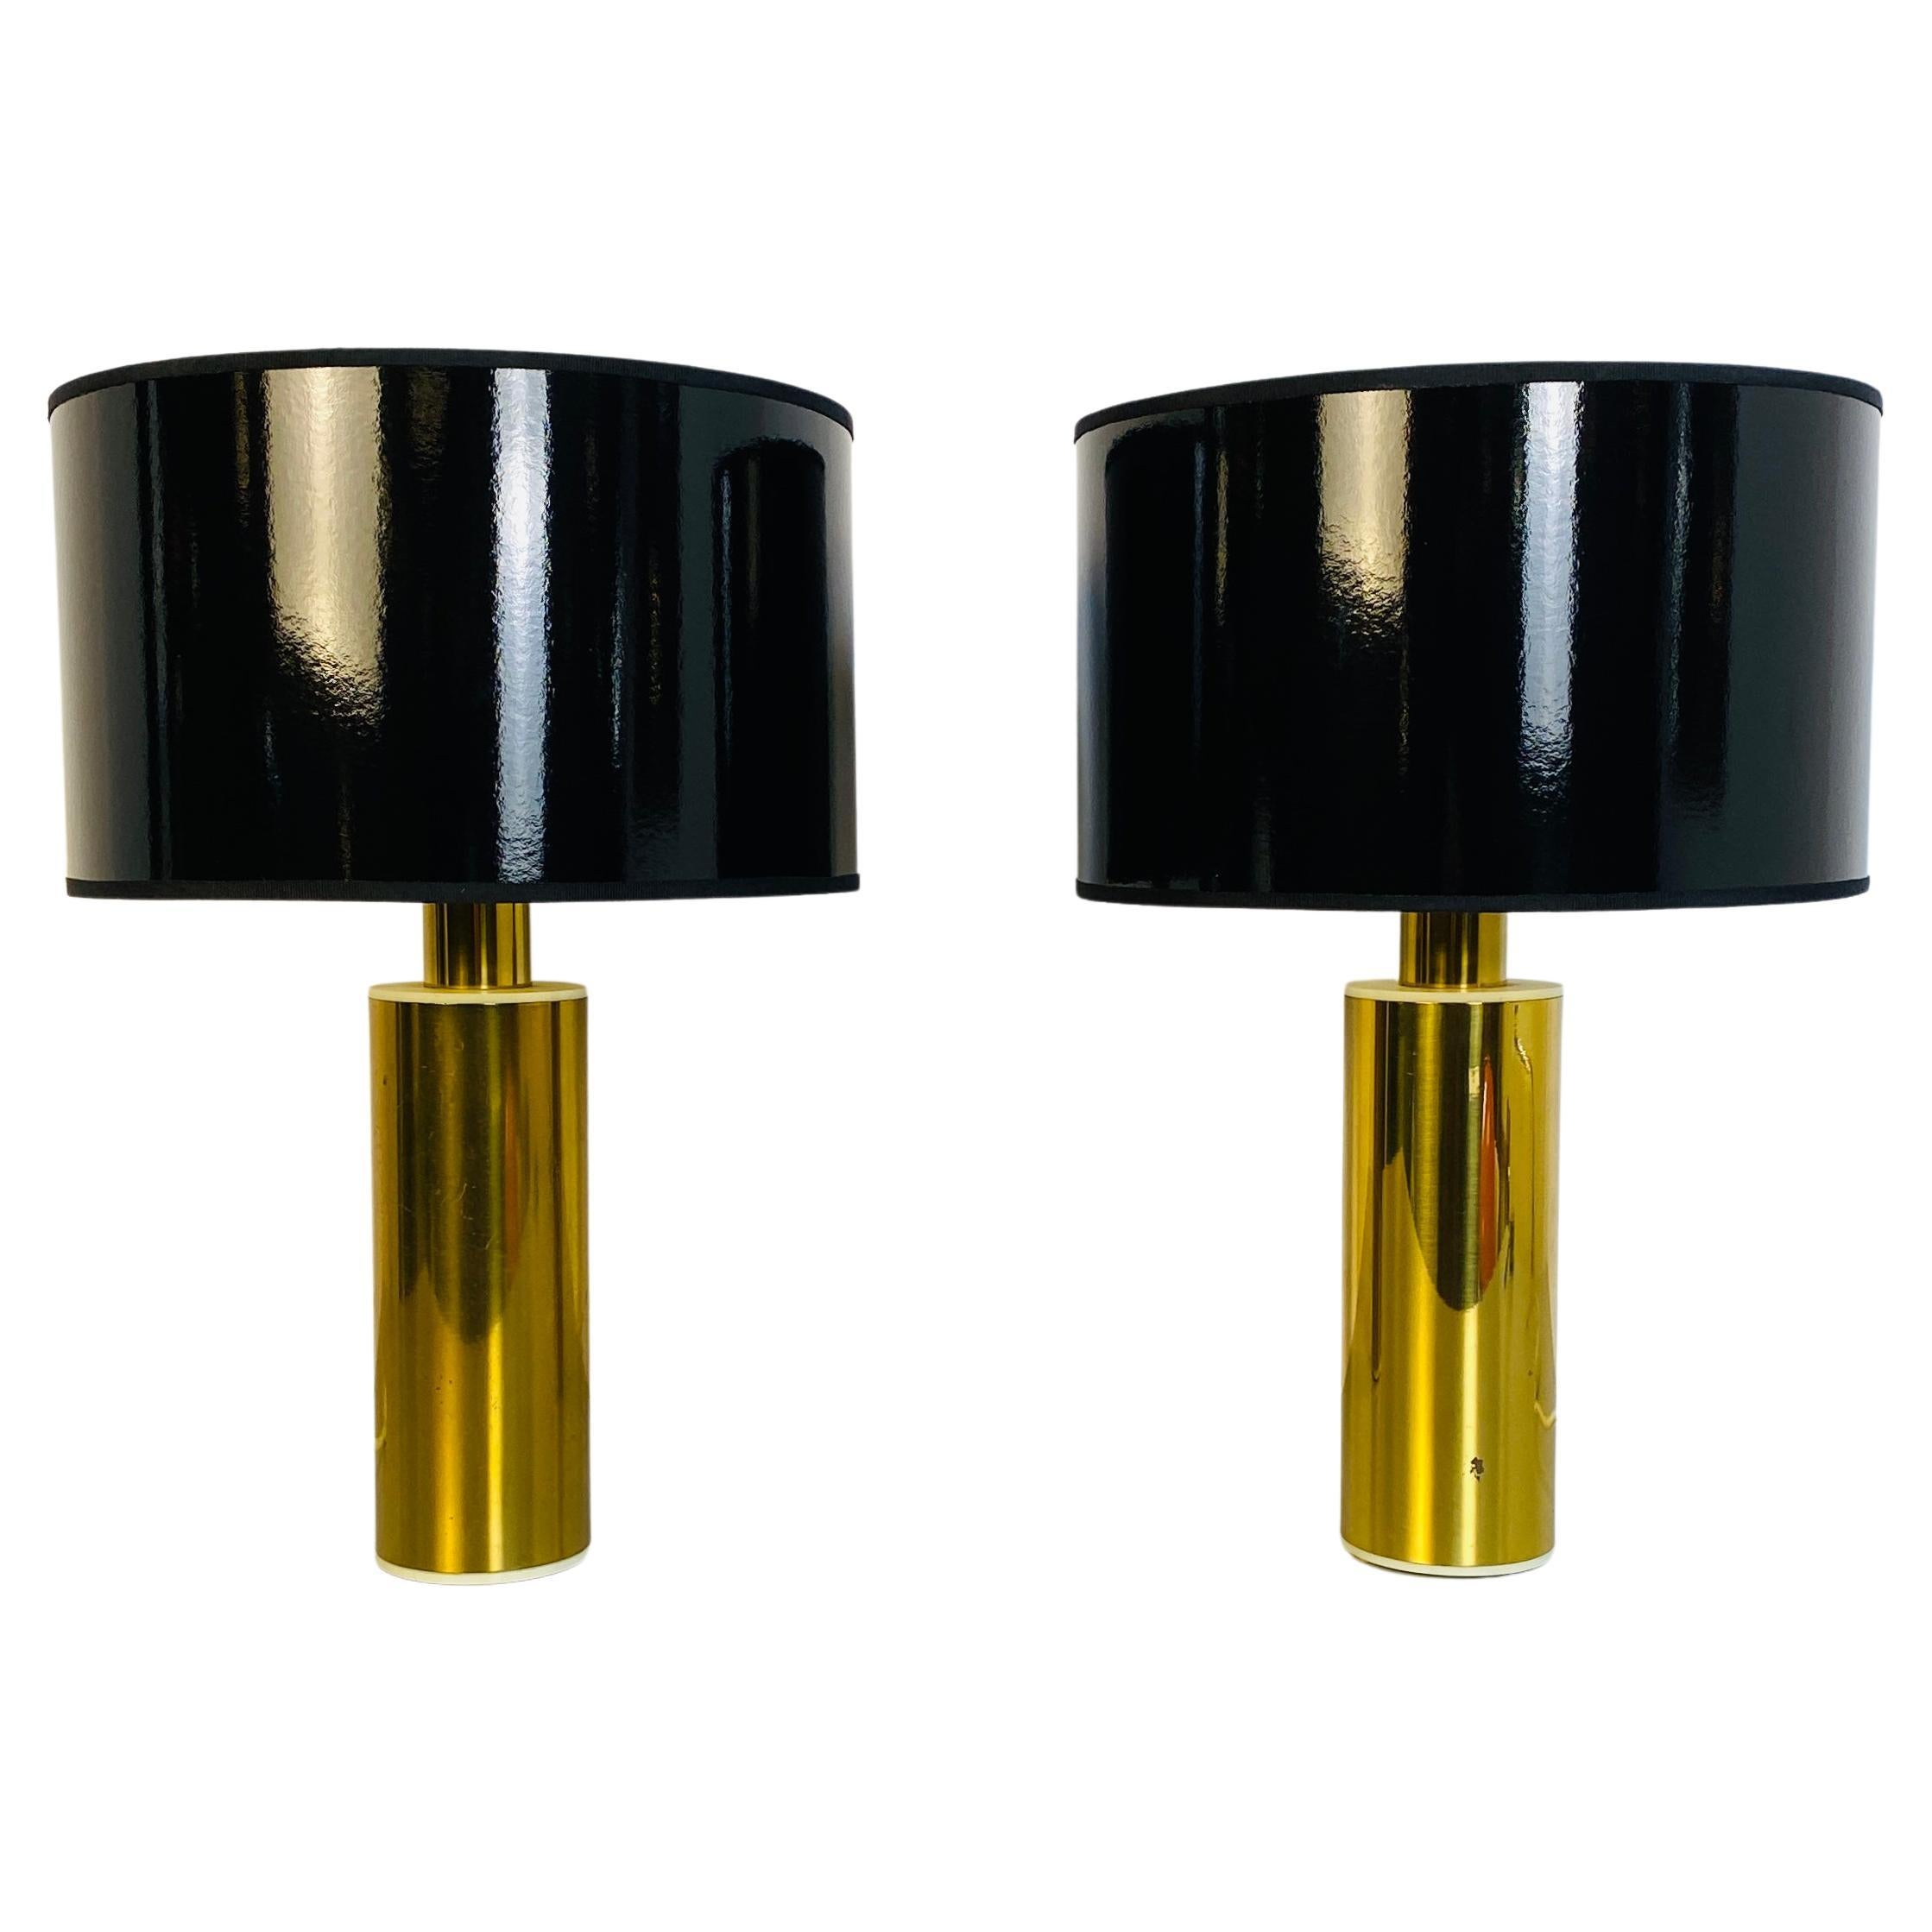 Italian Mid-Century Modern Brass Table Lamps with Cylindrical Lampshade, 1970s